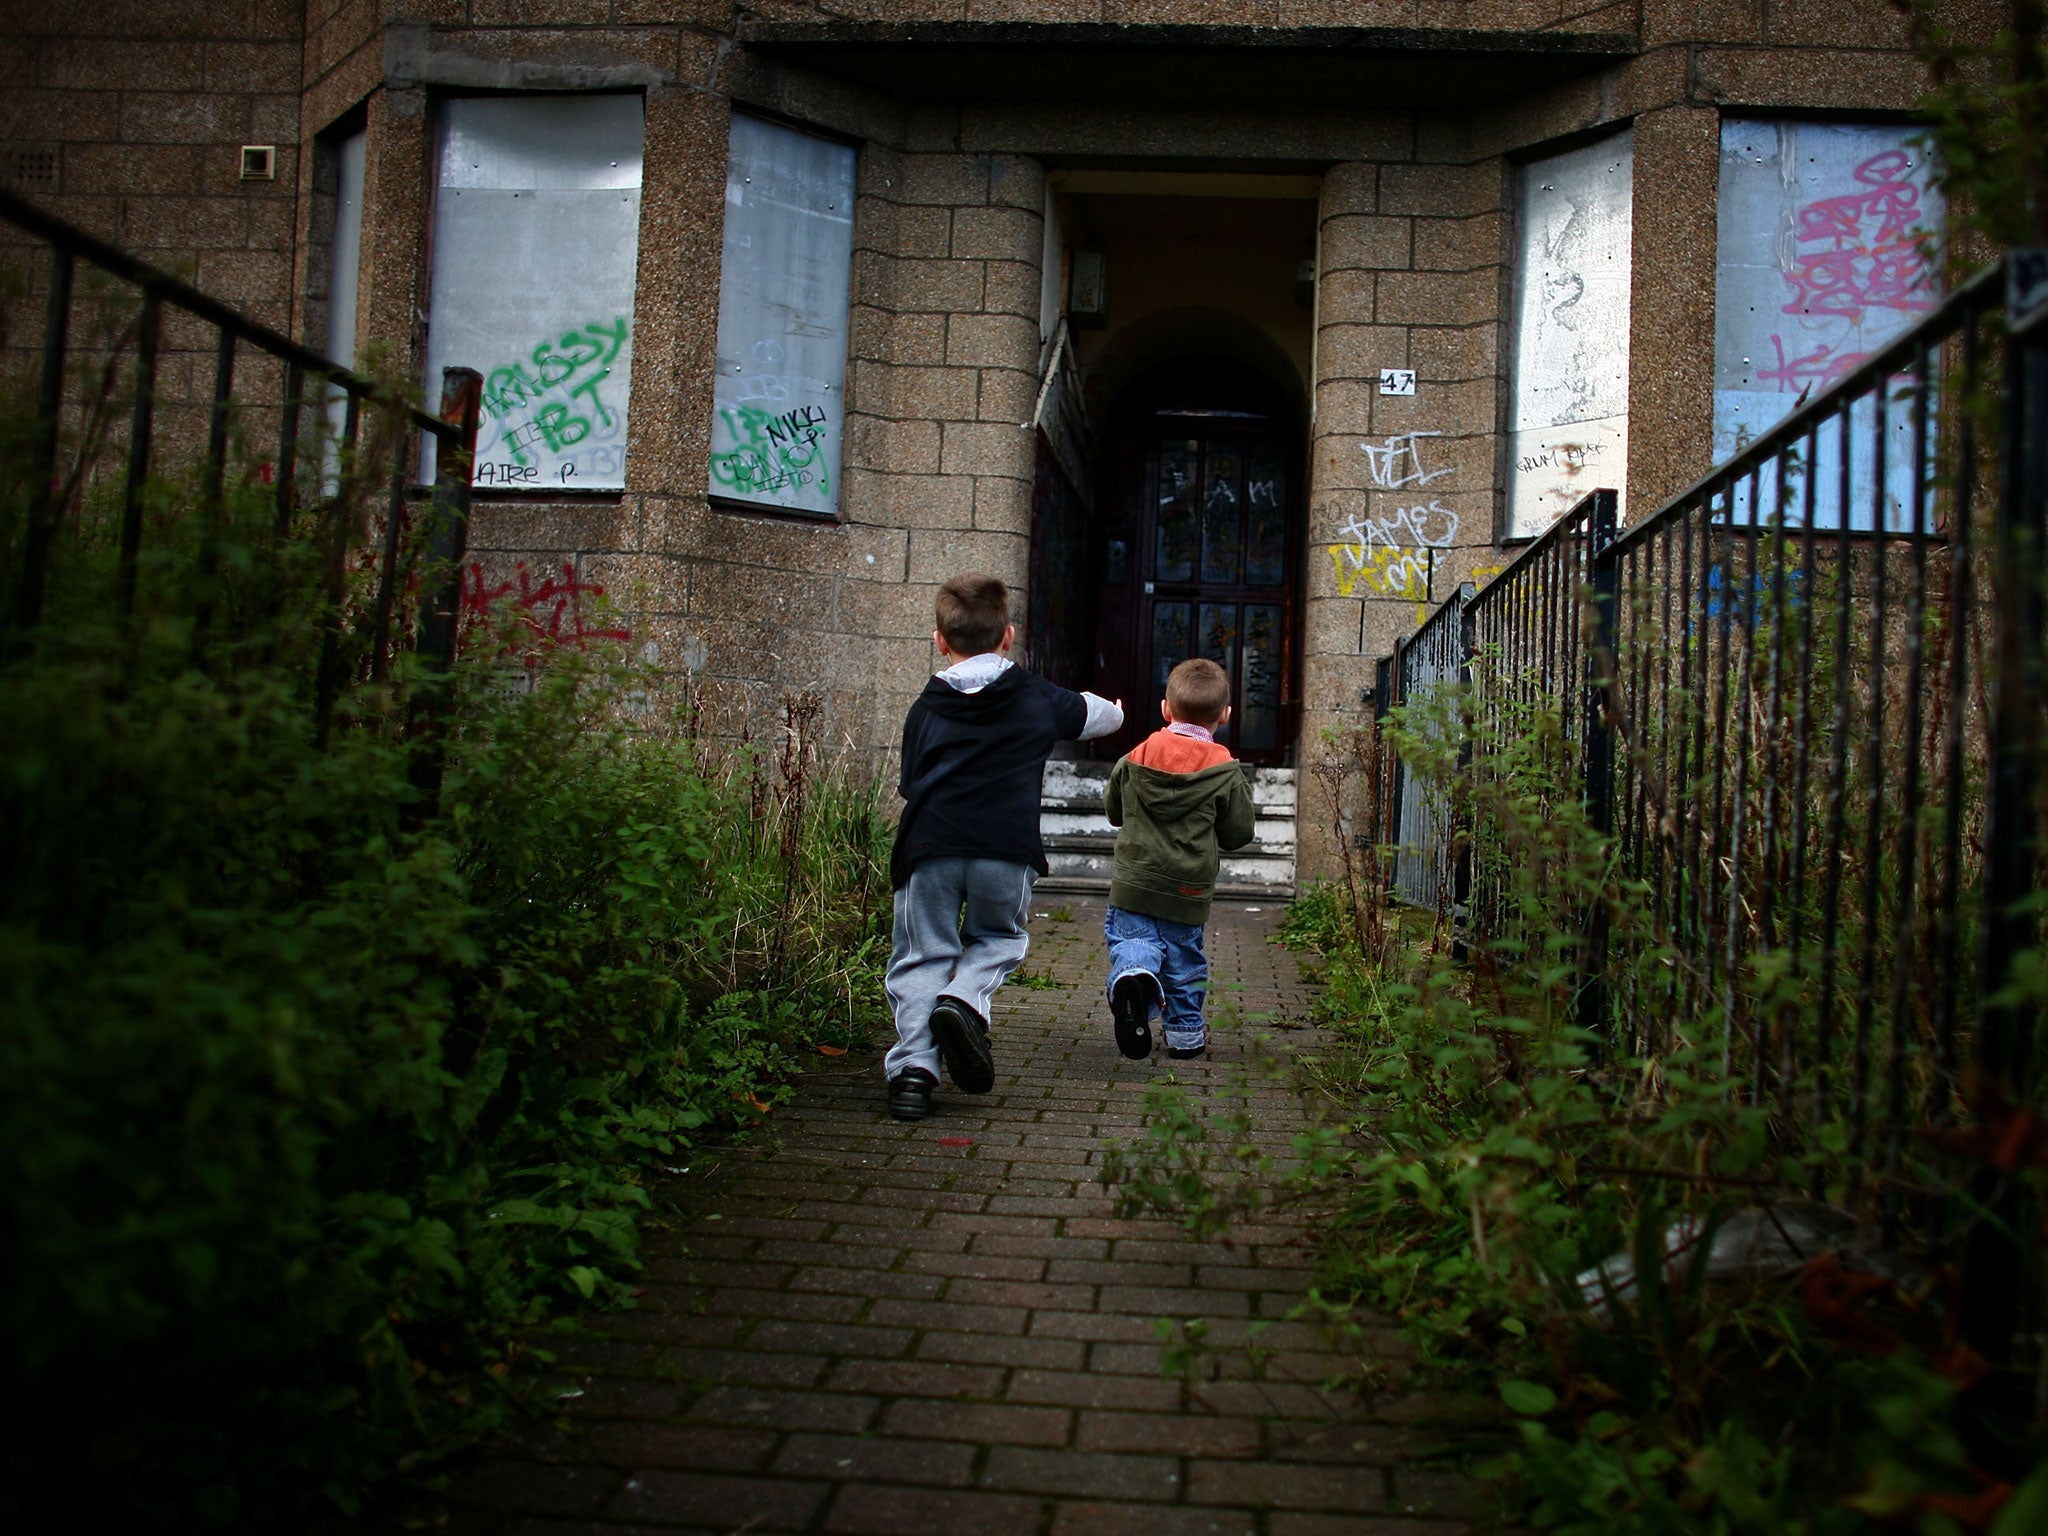 Two young boys play in a run down street with boarded up houses, September 30, 2008 in the Govan area of Glasgow, Scotland